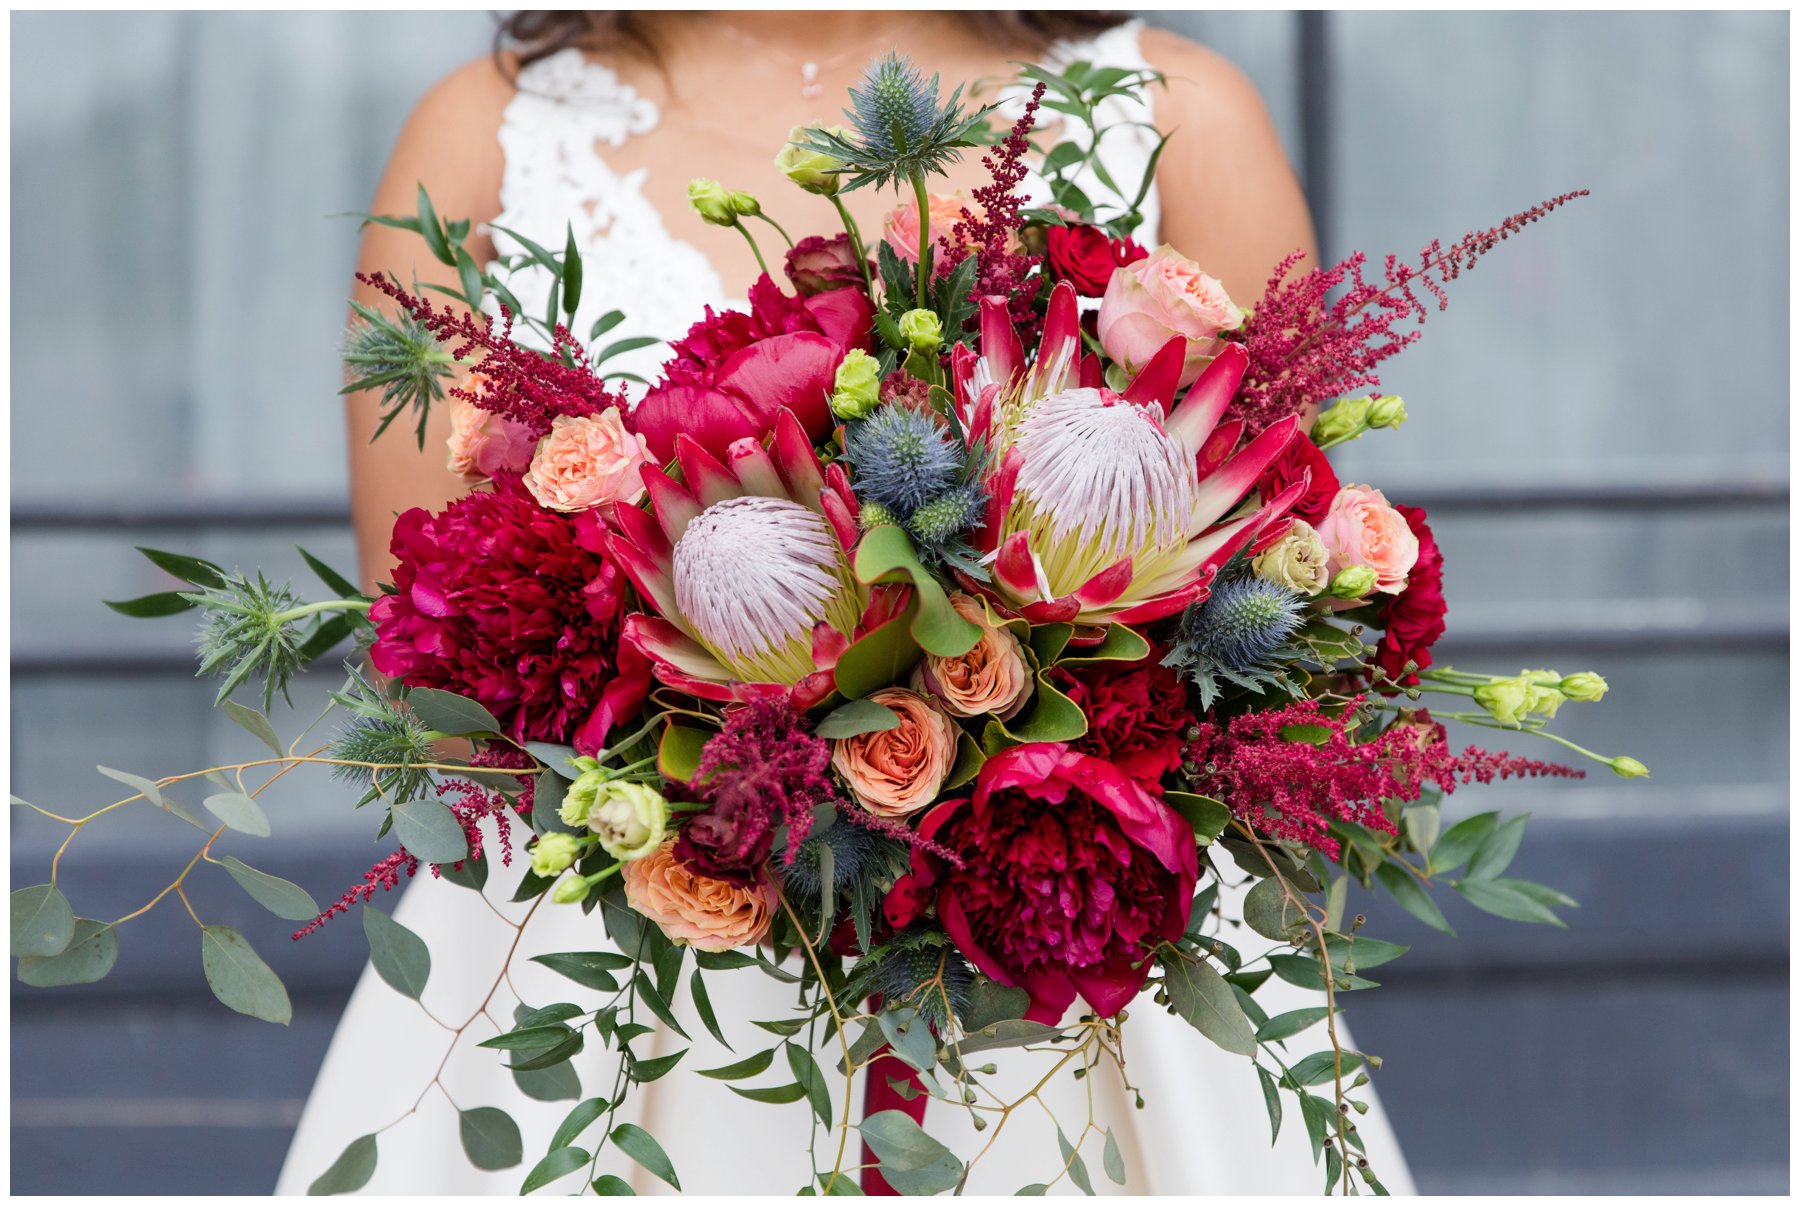 Red protea and peonies bouquet